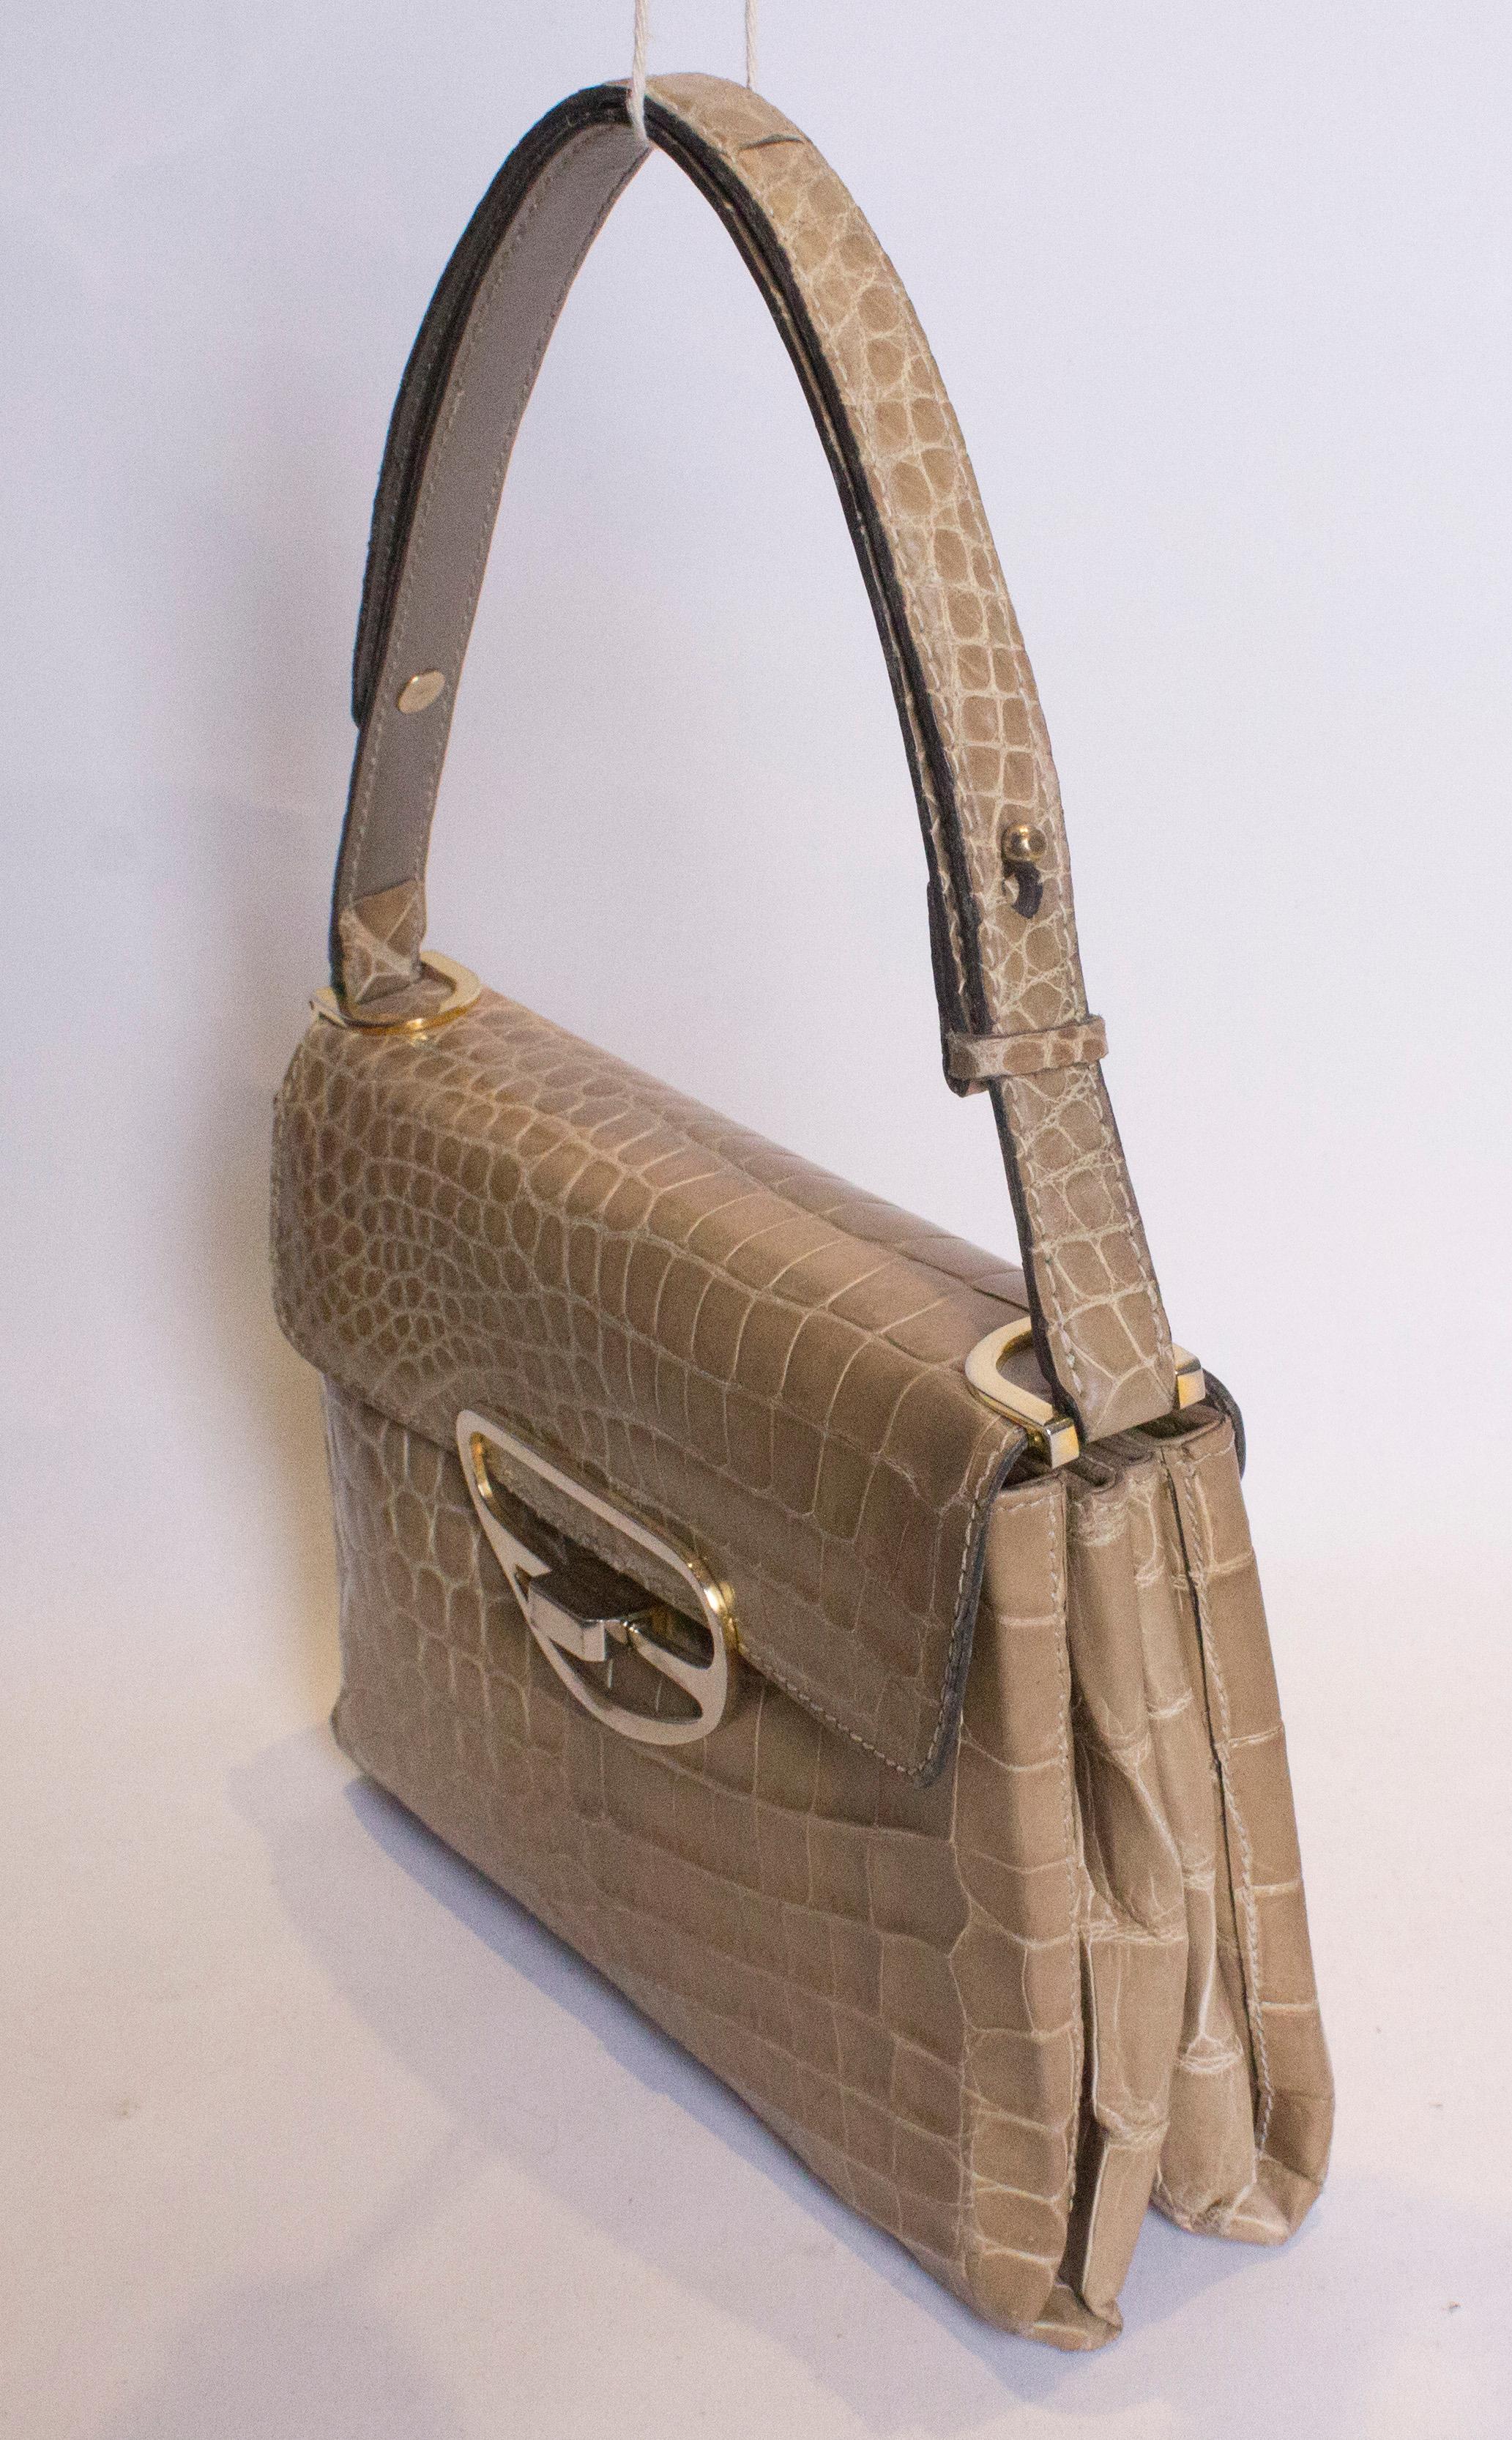 A chic biscuit colour crocodile bag  with adjustable strap and so can be either a handbag or shoulder bag. Internaly there are two pouch pockets. Measurements: width 10'', height 7'', depth 3'